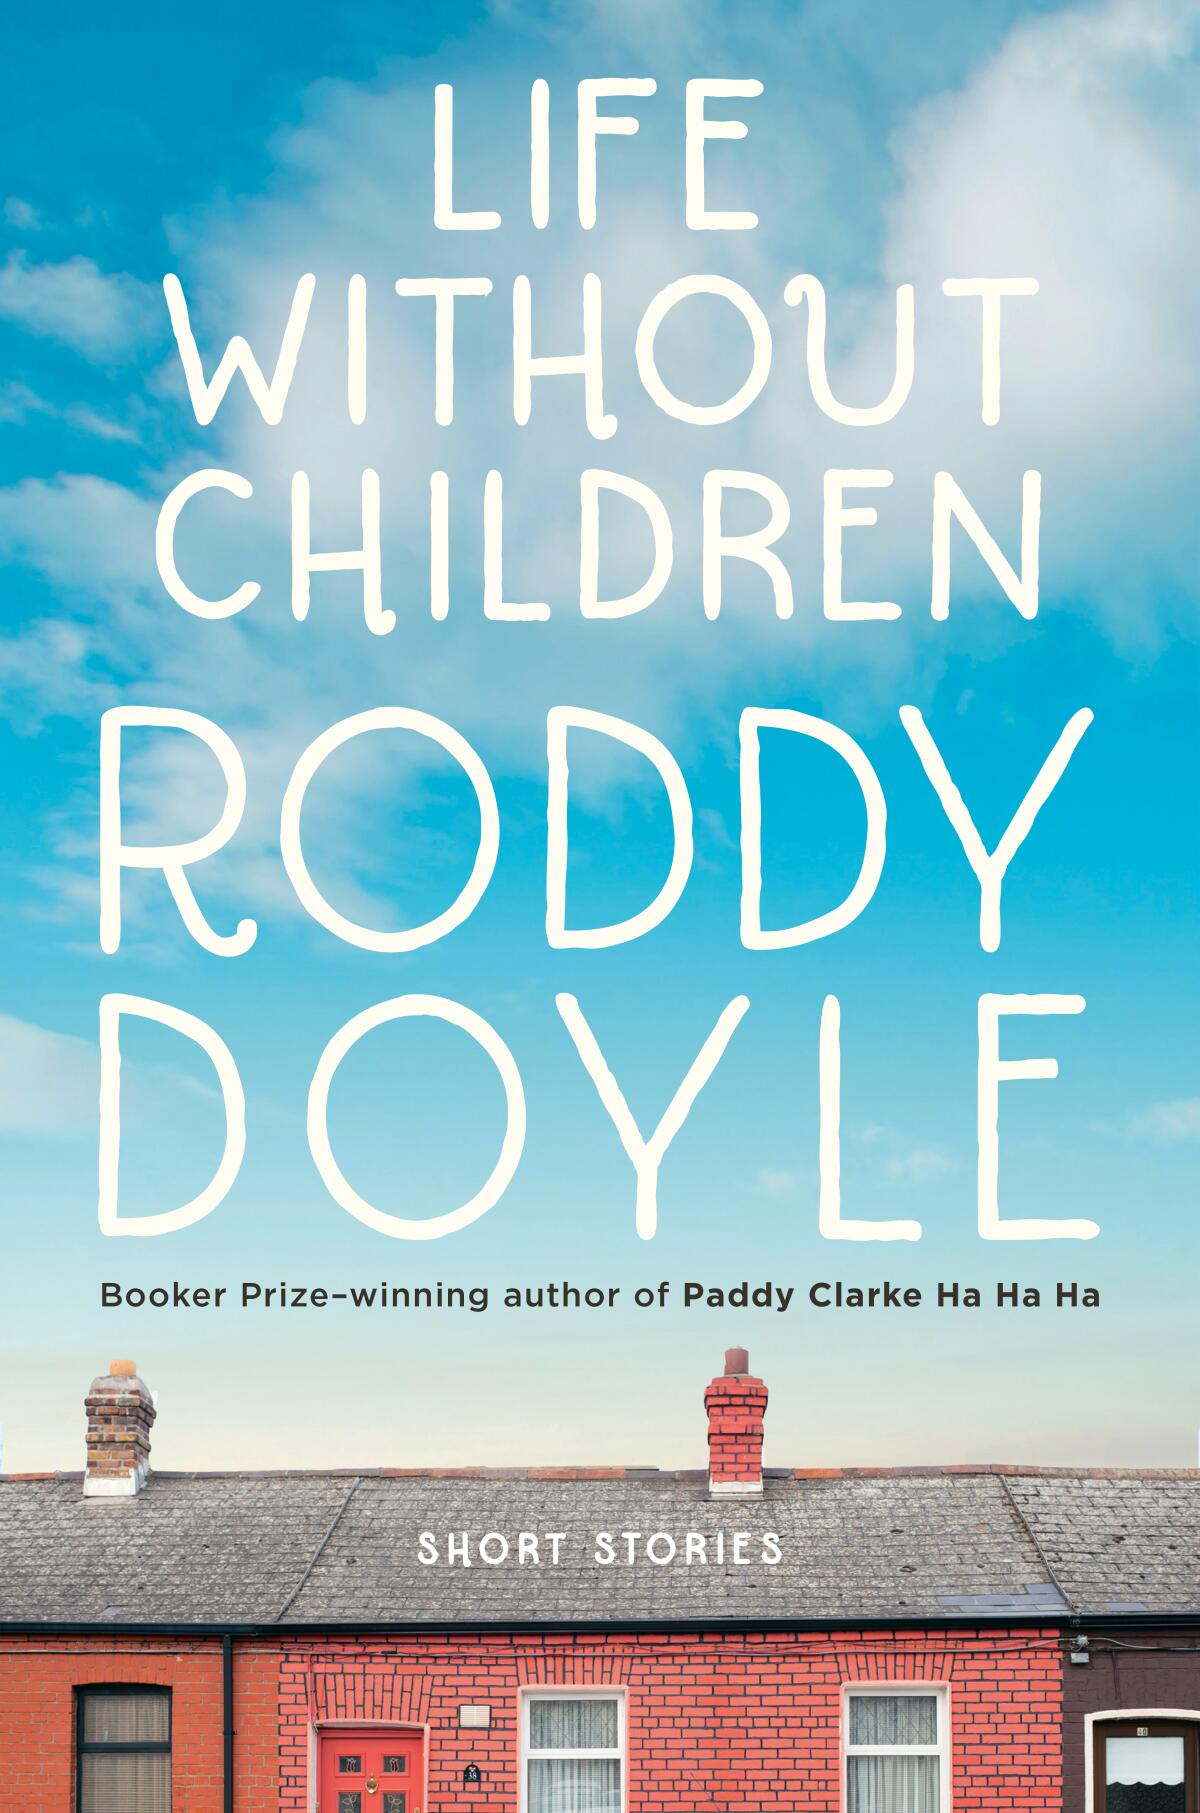 "Life Without Children," by Roddy Doyle